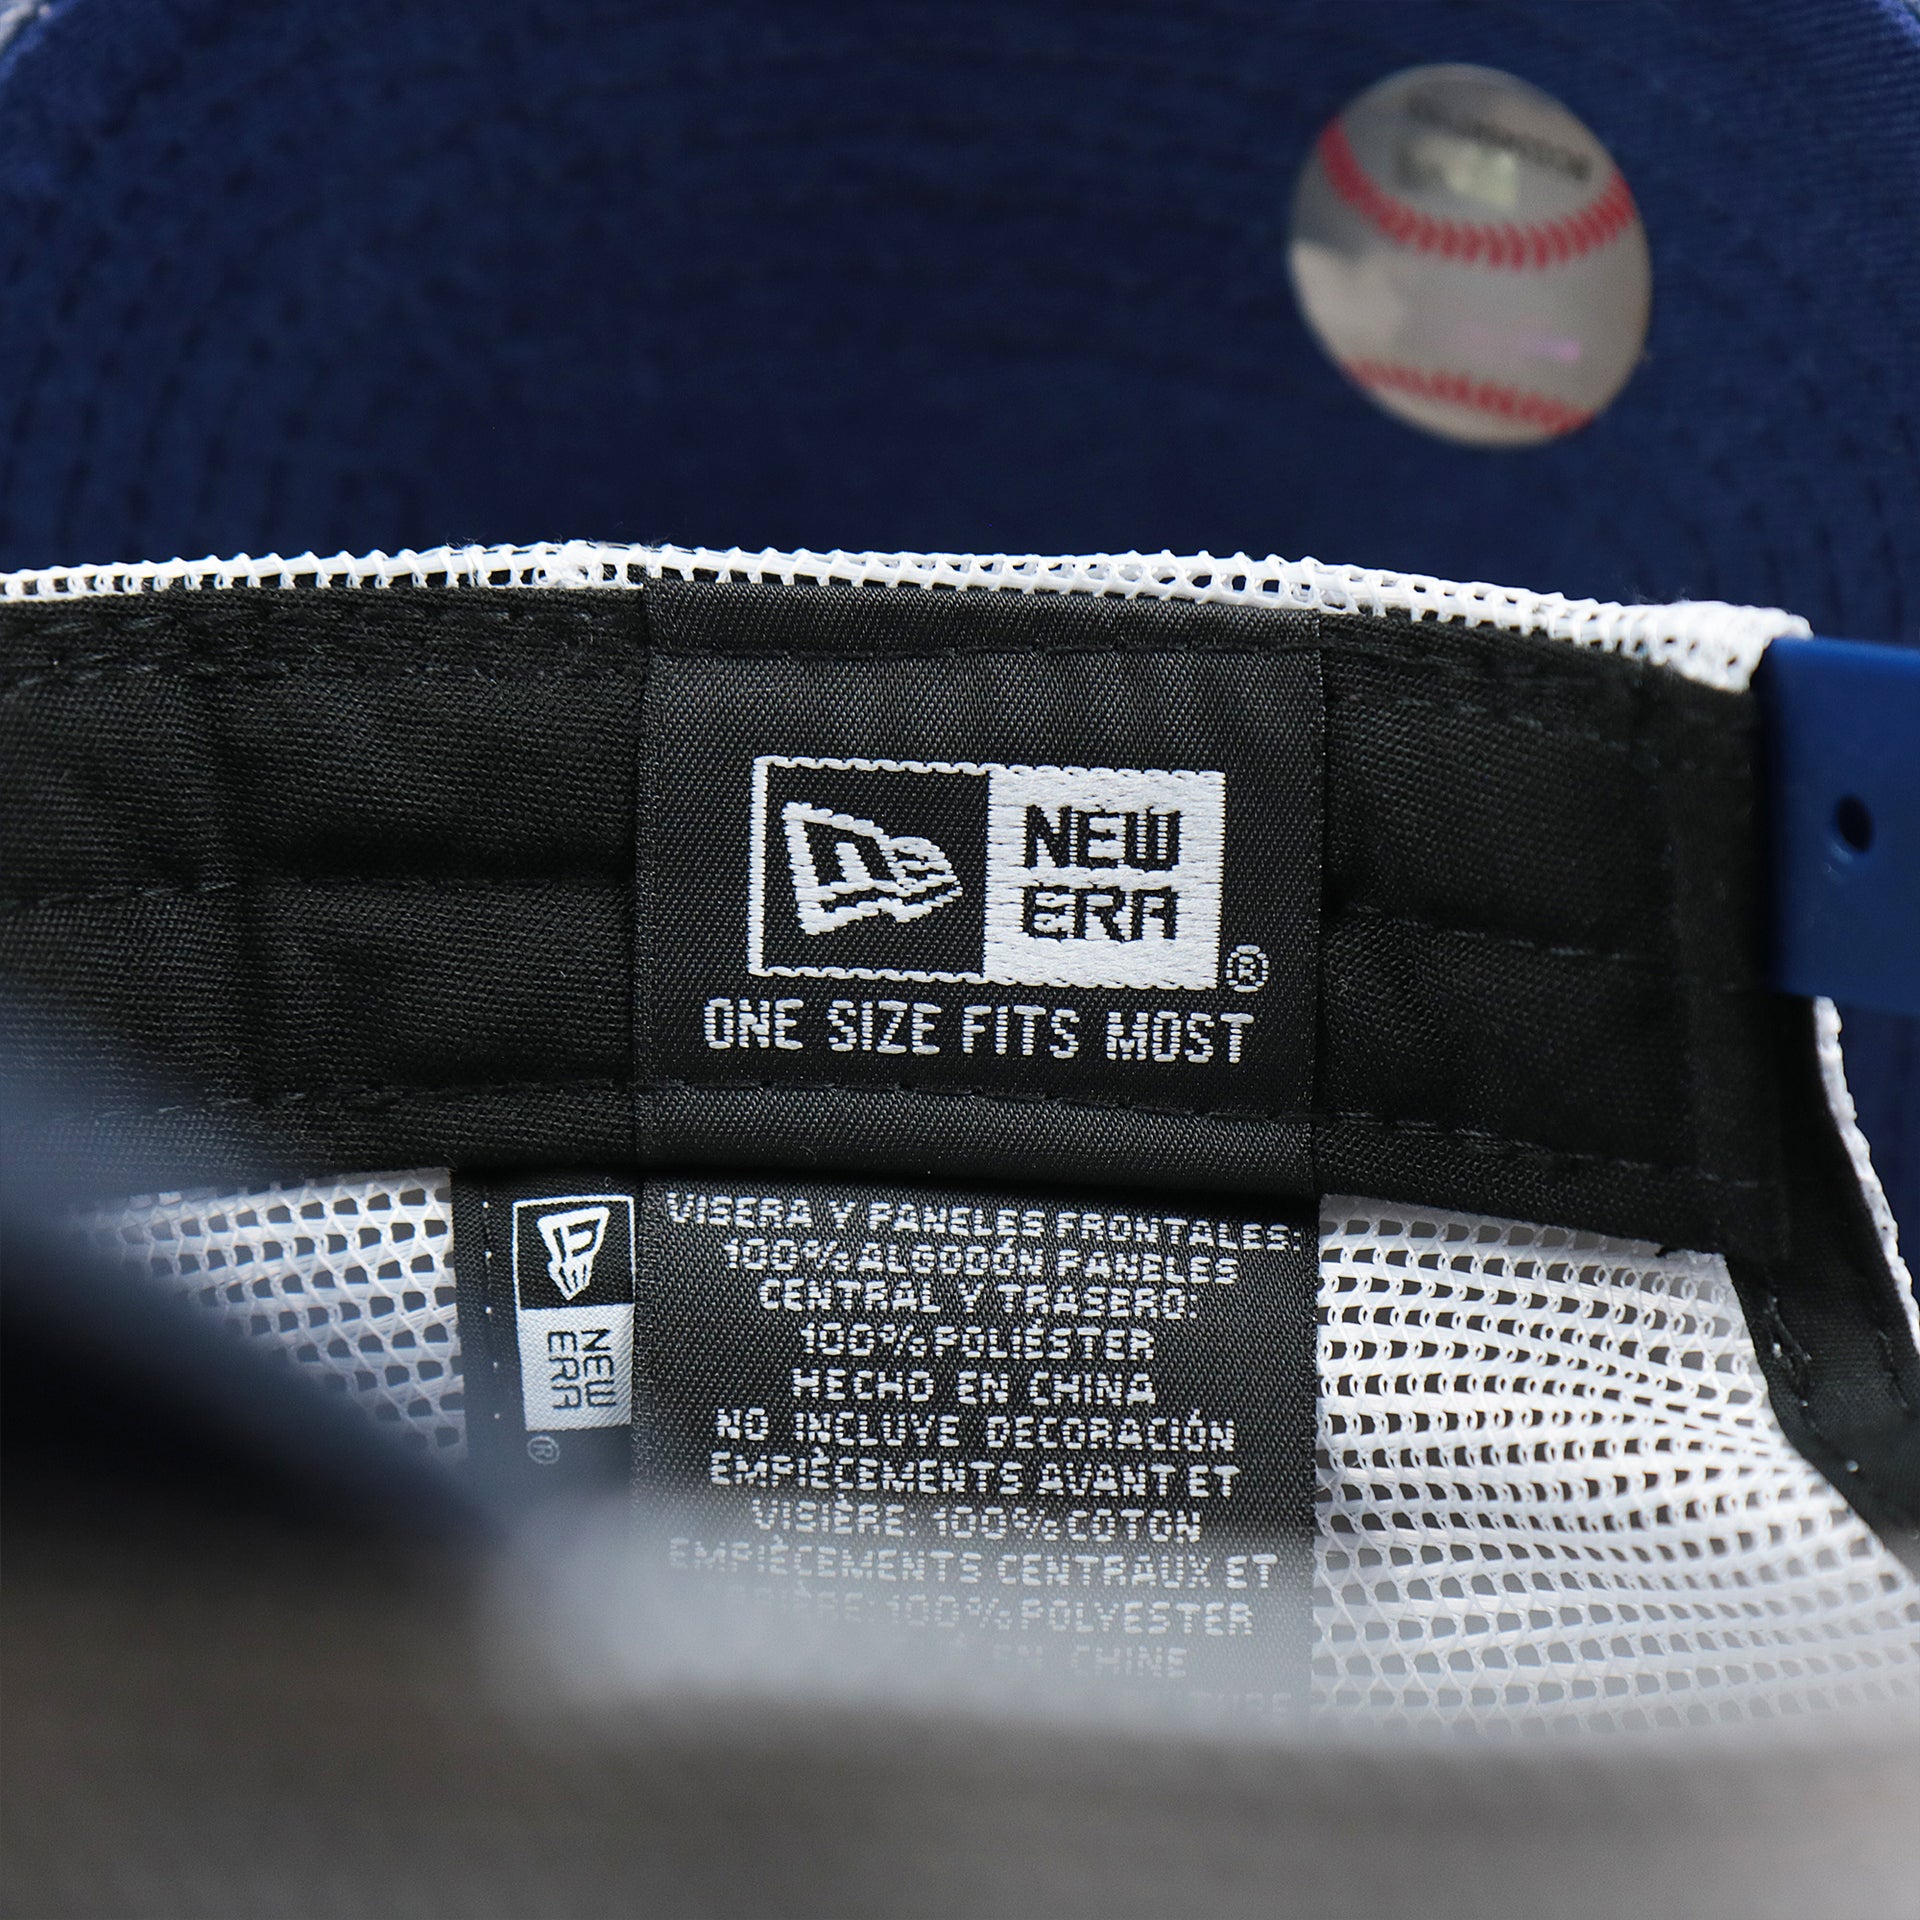 The New Era Tag on the Cooperstown Brooklyn Dodgers 1947s Logo Worn Colorway Mesh Back 9Forty Dad Hat | Royal Blue 9Forty Hat